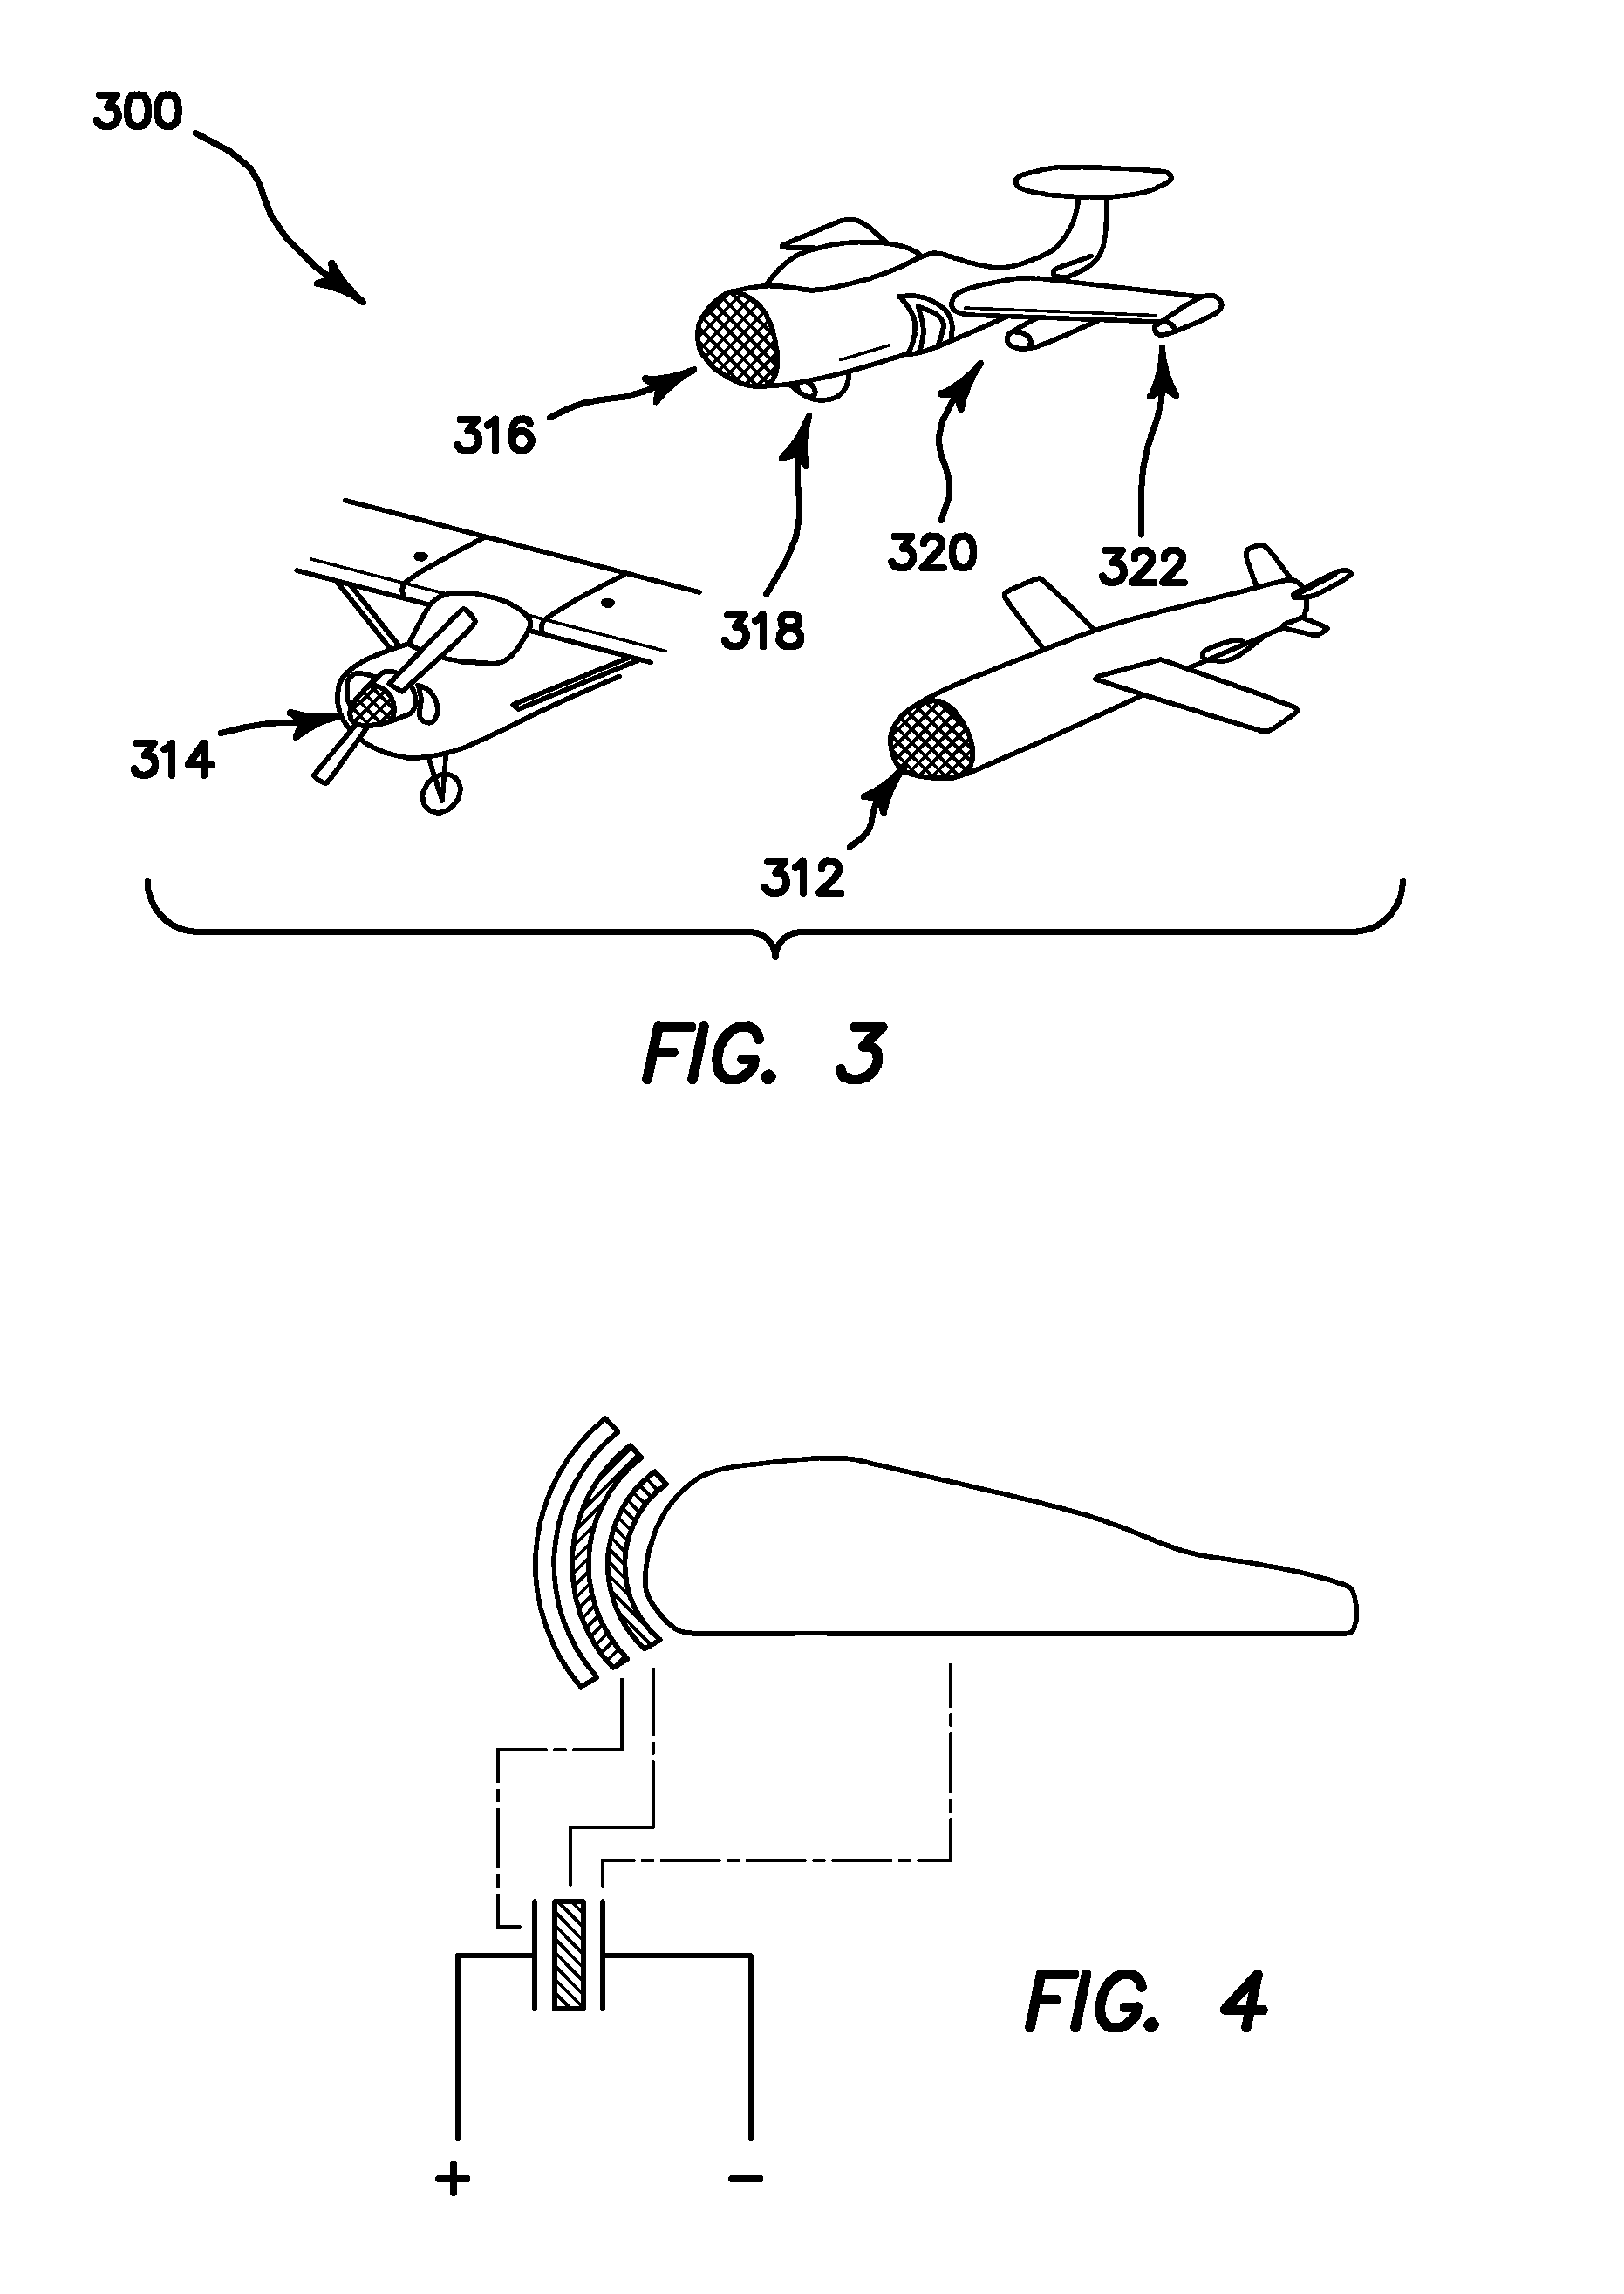 Anti-icing, de-icing, and heating configuration, integration, and power methods for aircraft, aerodynamic, and complex surfaces